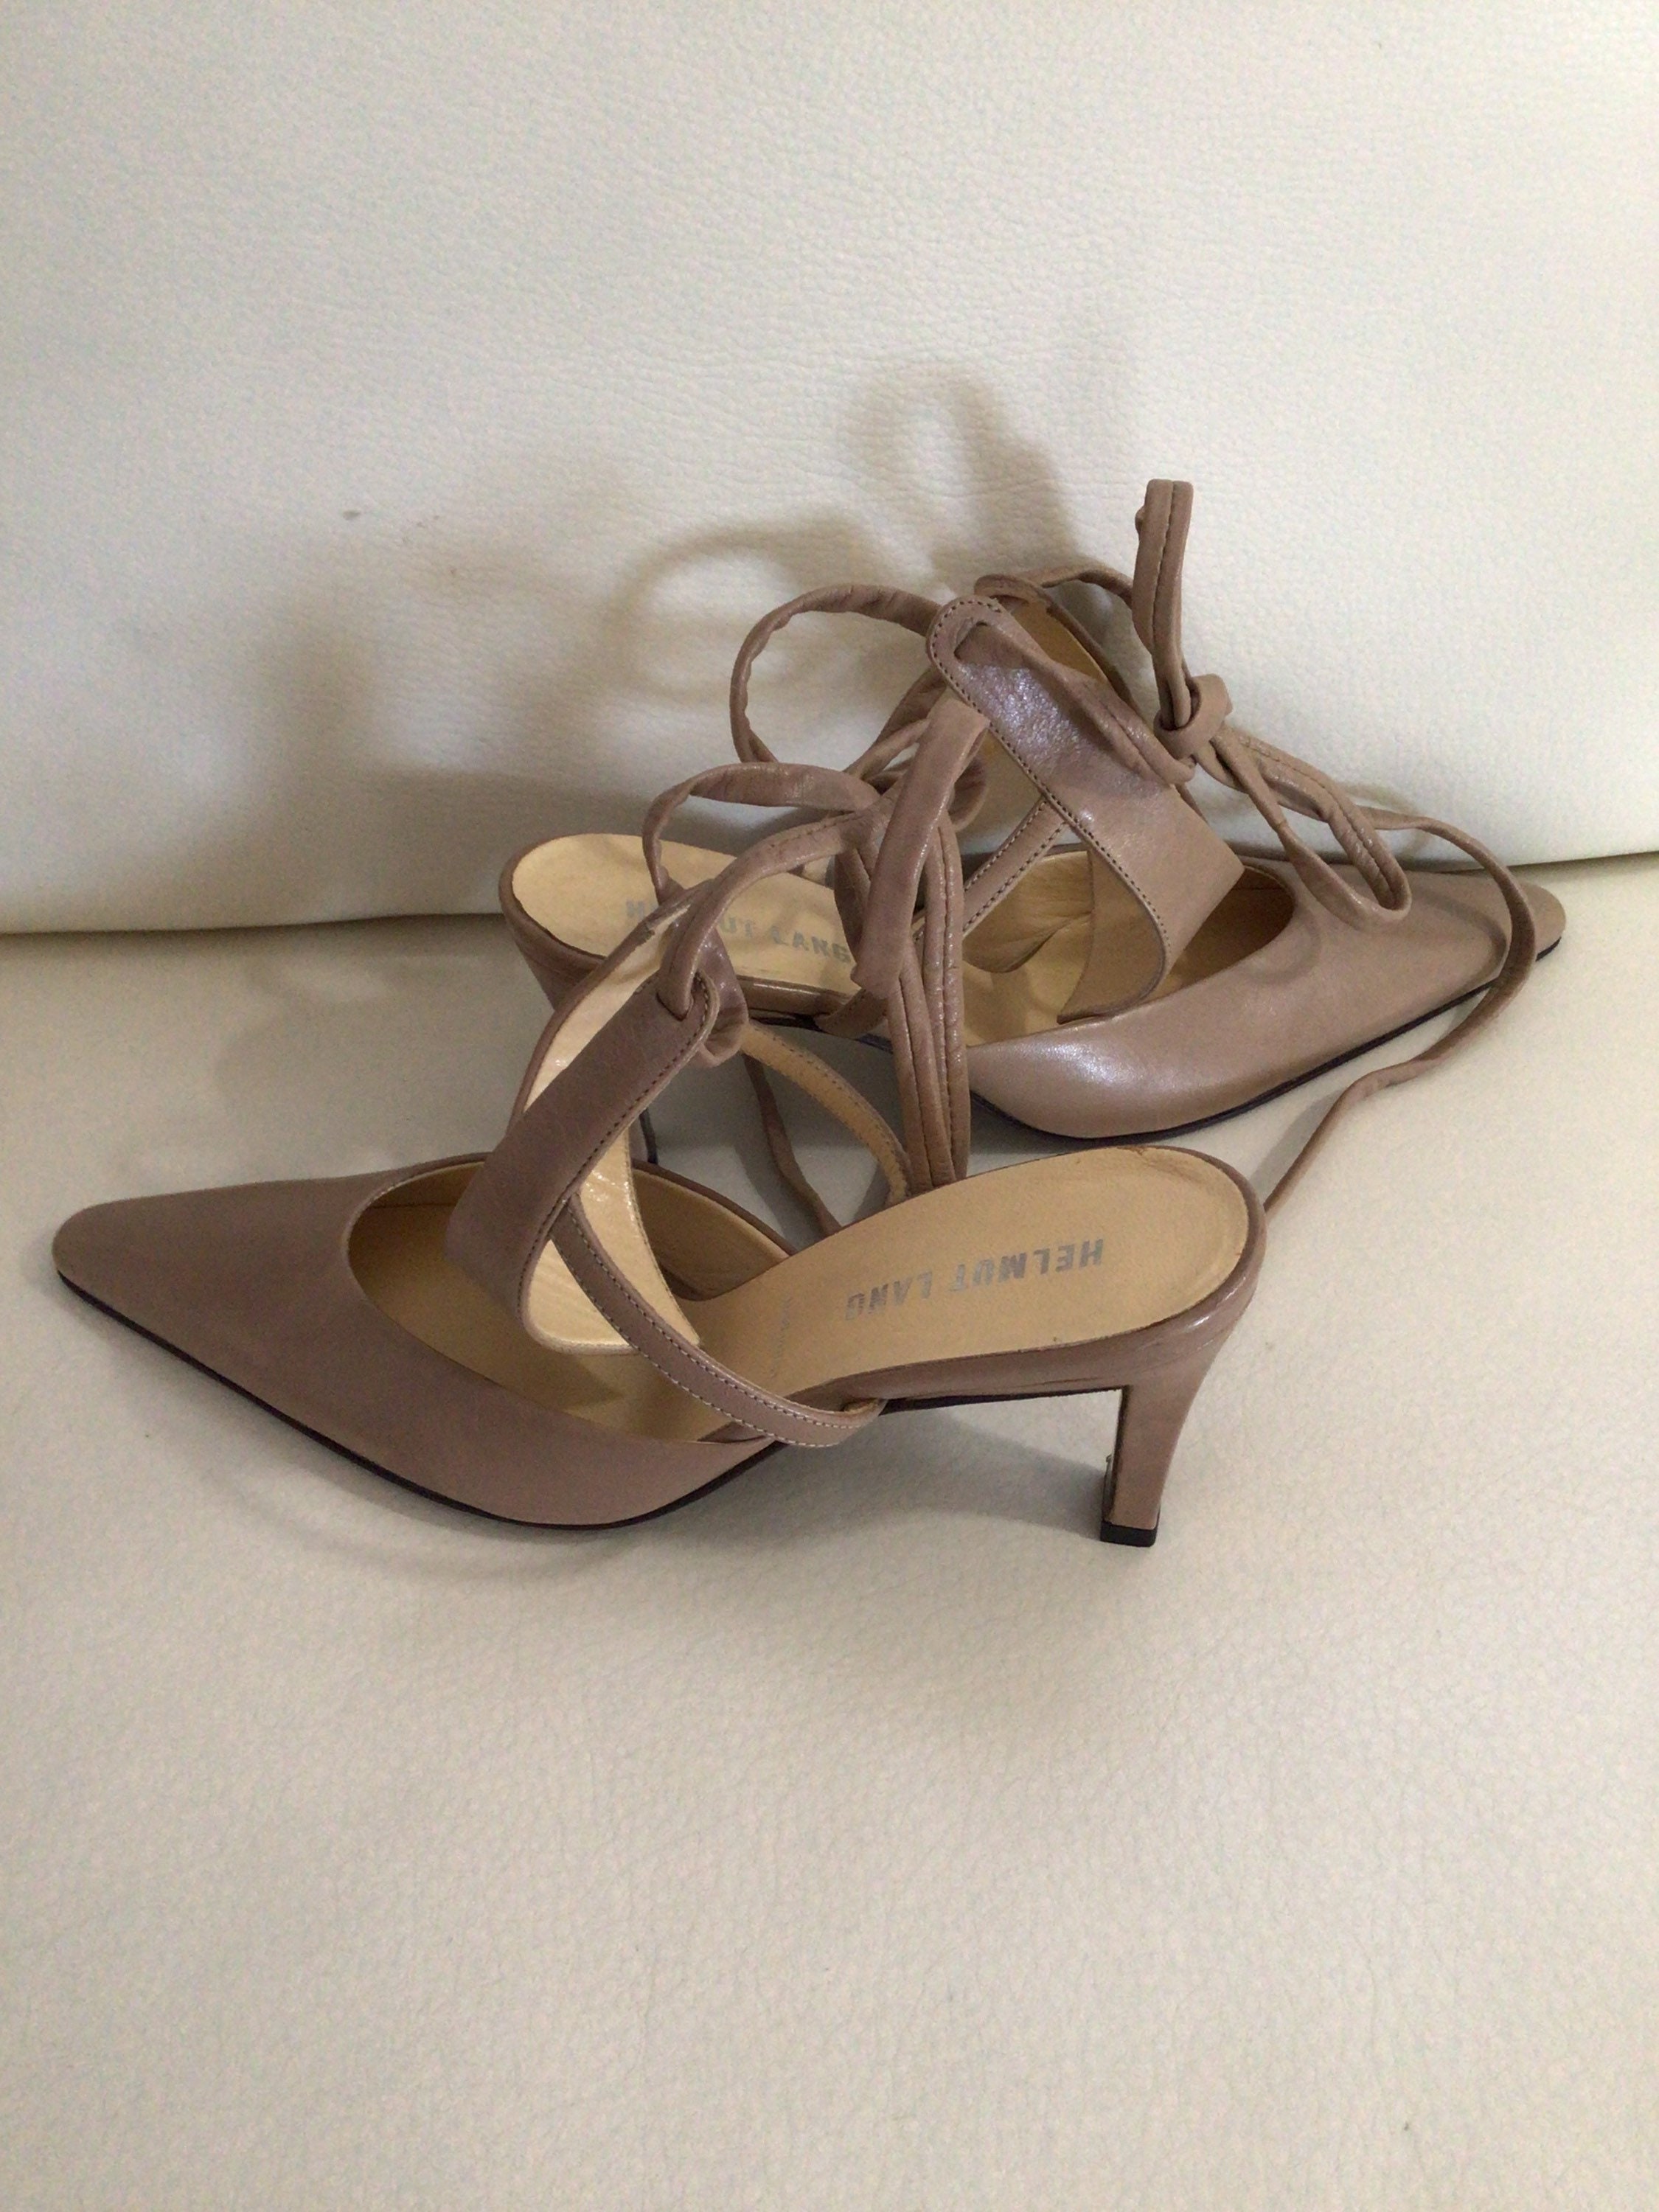 Vintage Lang Nude Shoes Square Ankle - Etsy Denmark